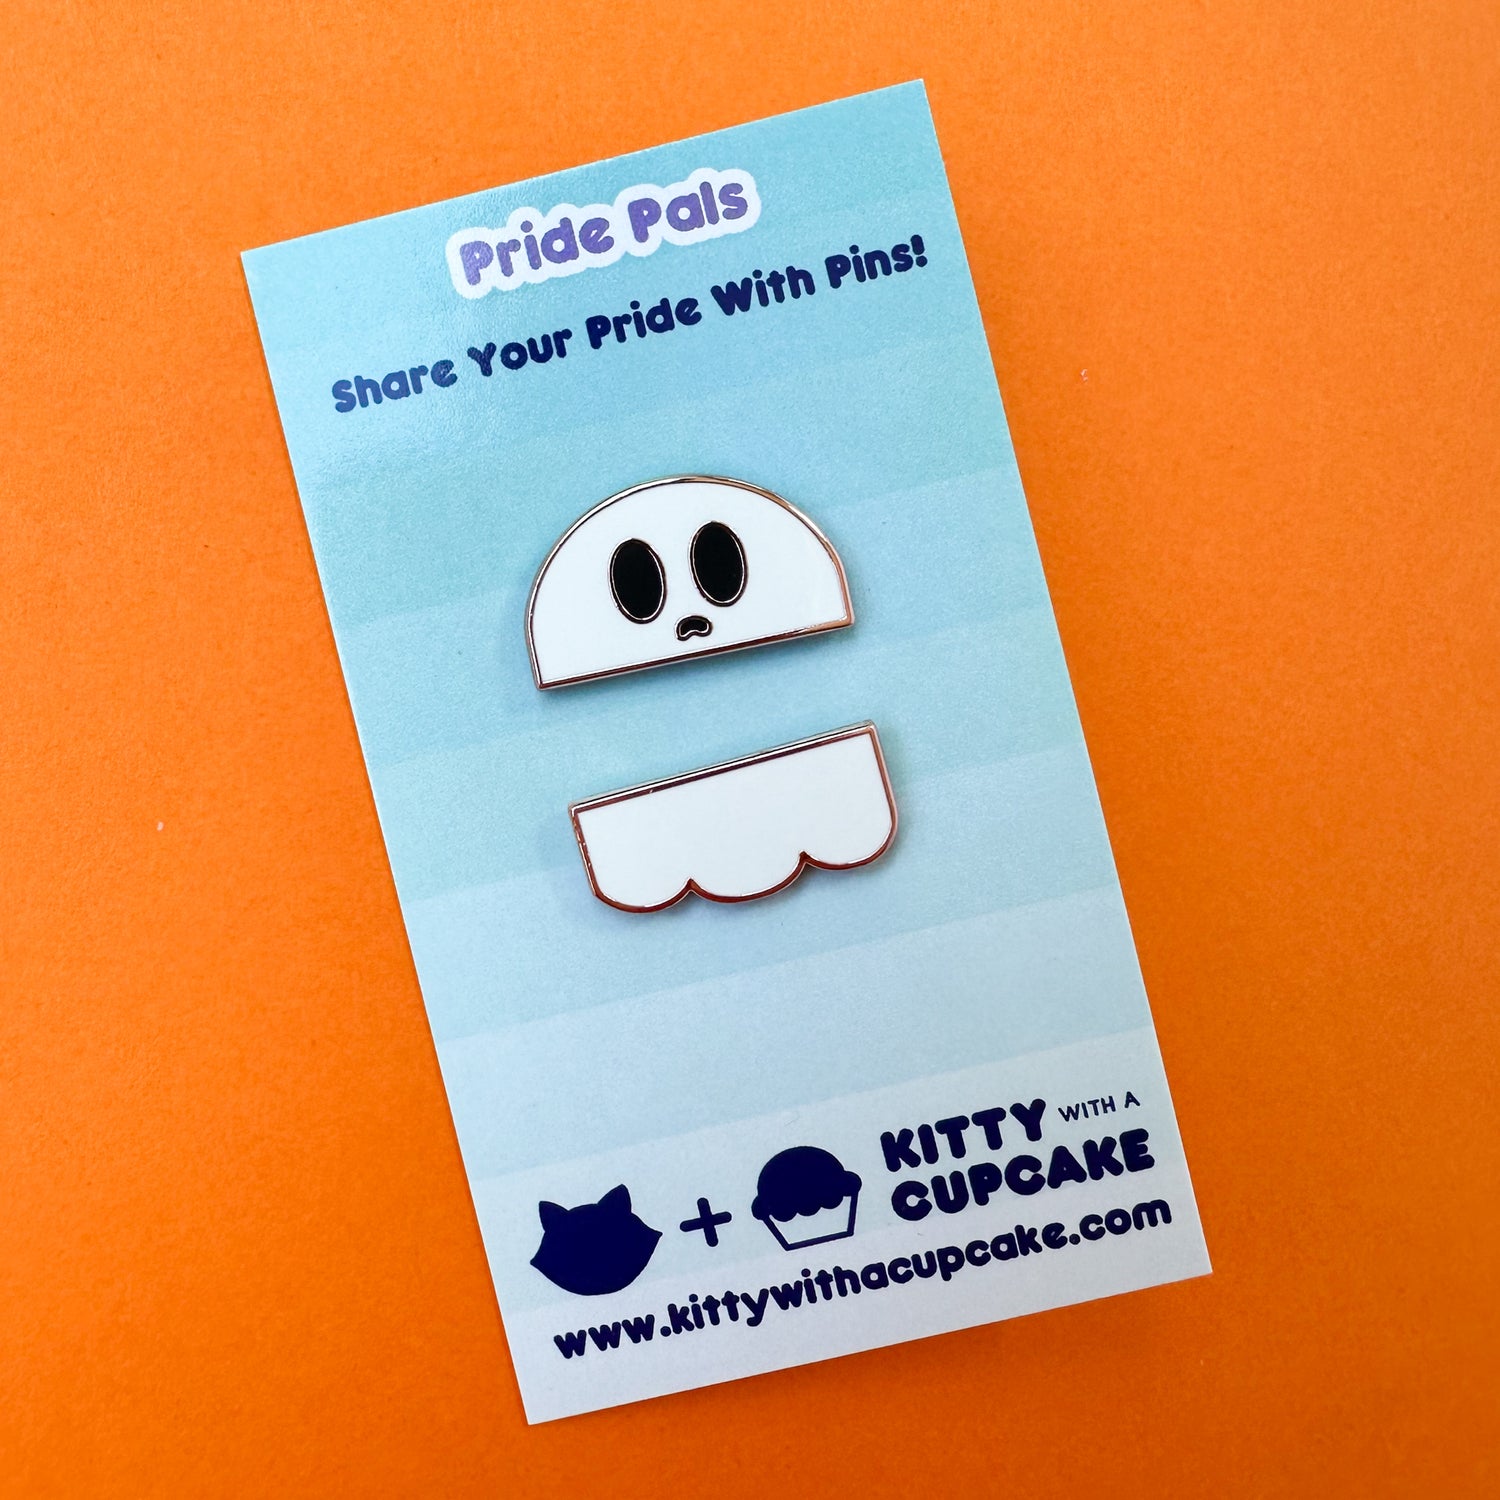 Two enamel pins that come together to form a ghost, they are packaged on a card which is sitting on an orange background. 